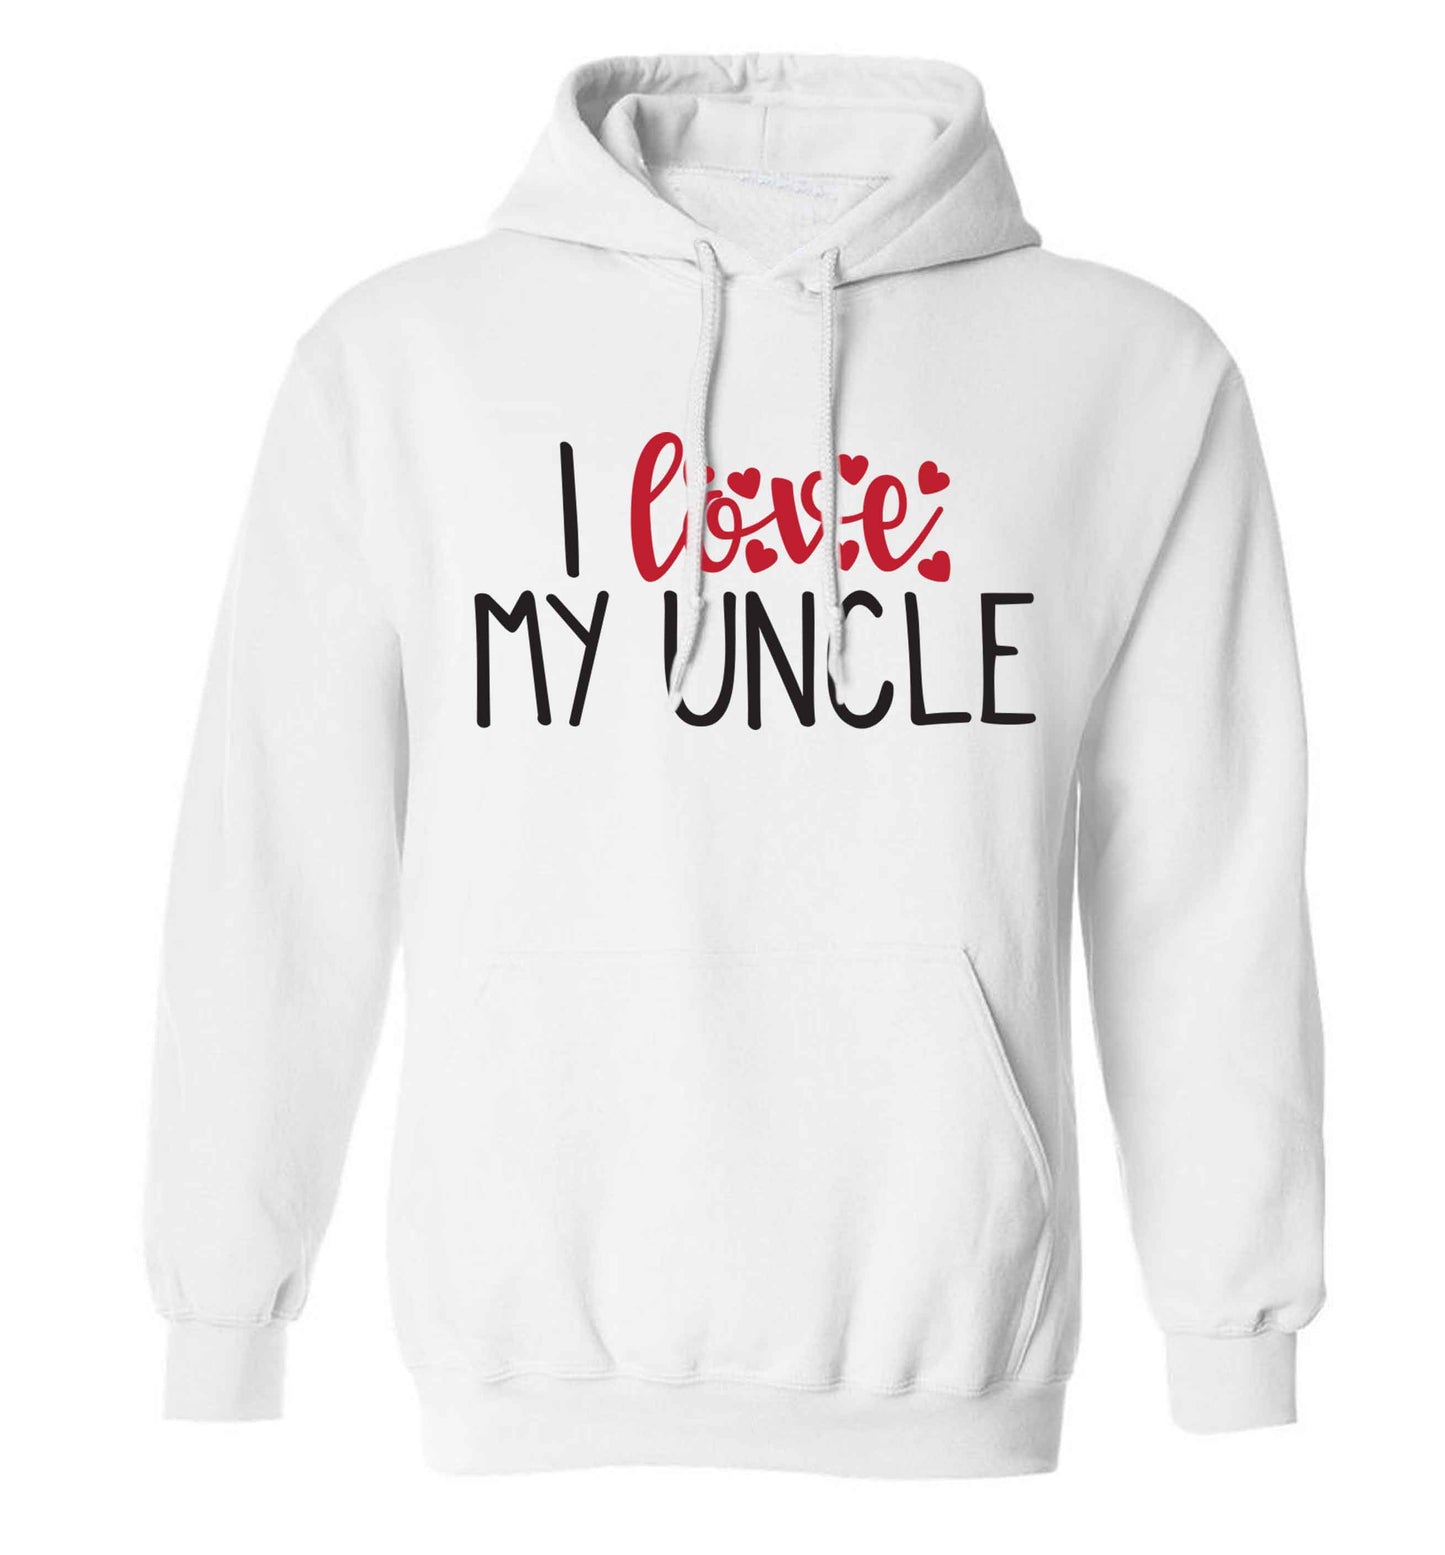 I love my uncle adults unisex white hoodie 2XL